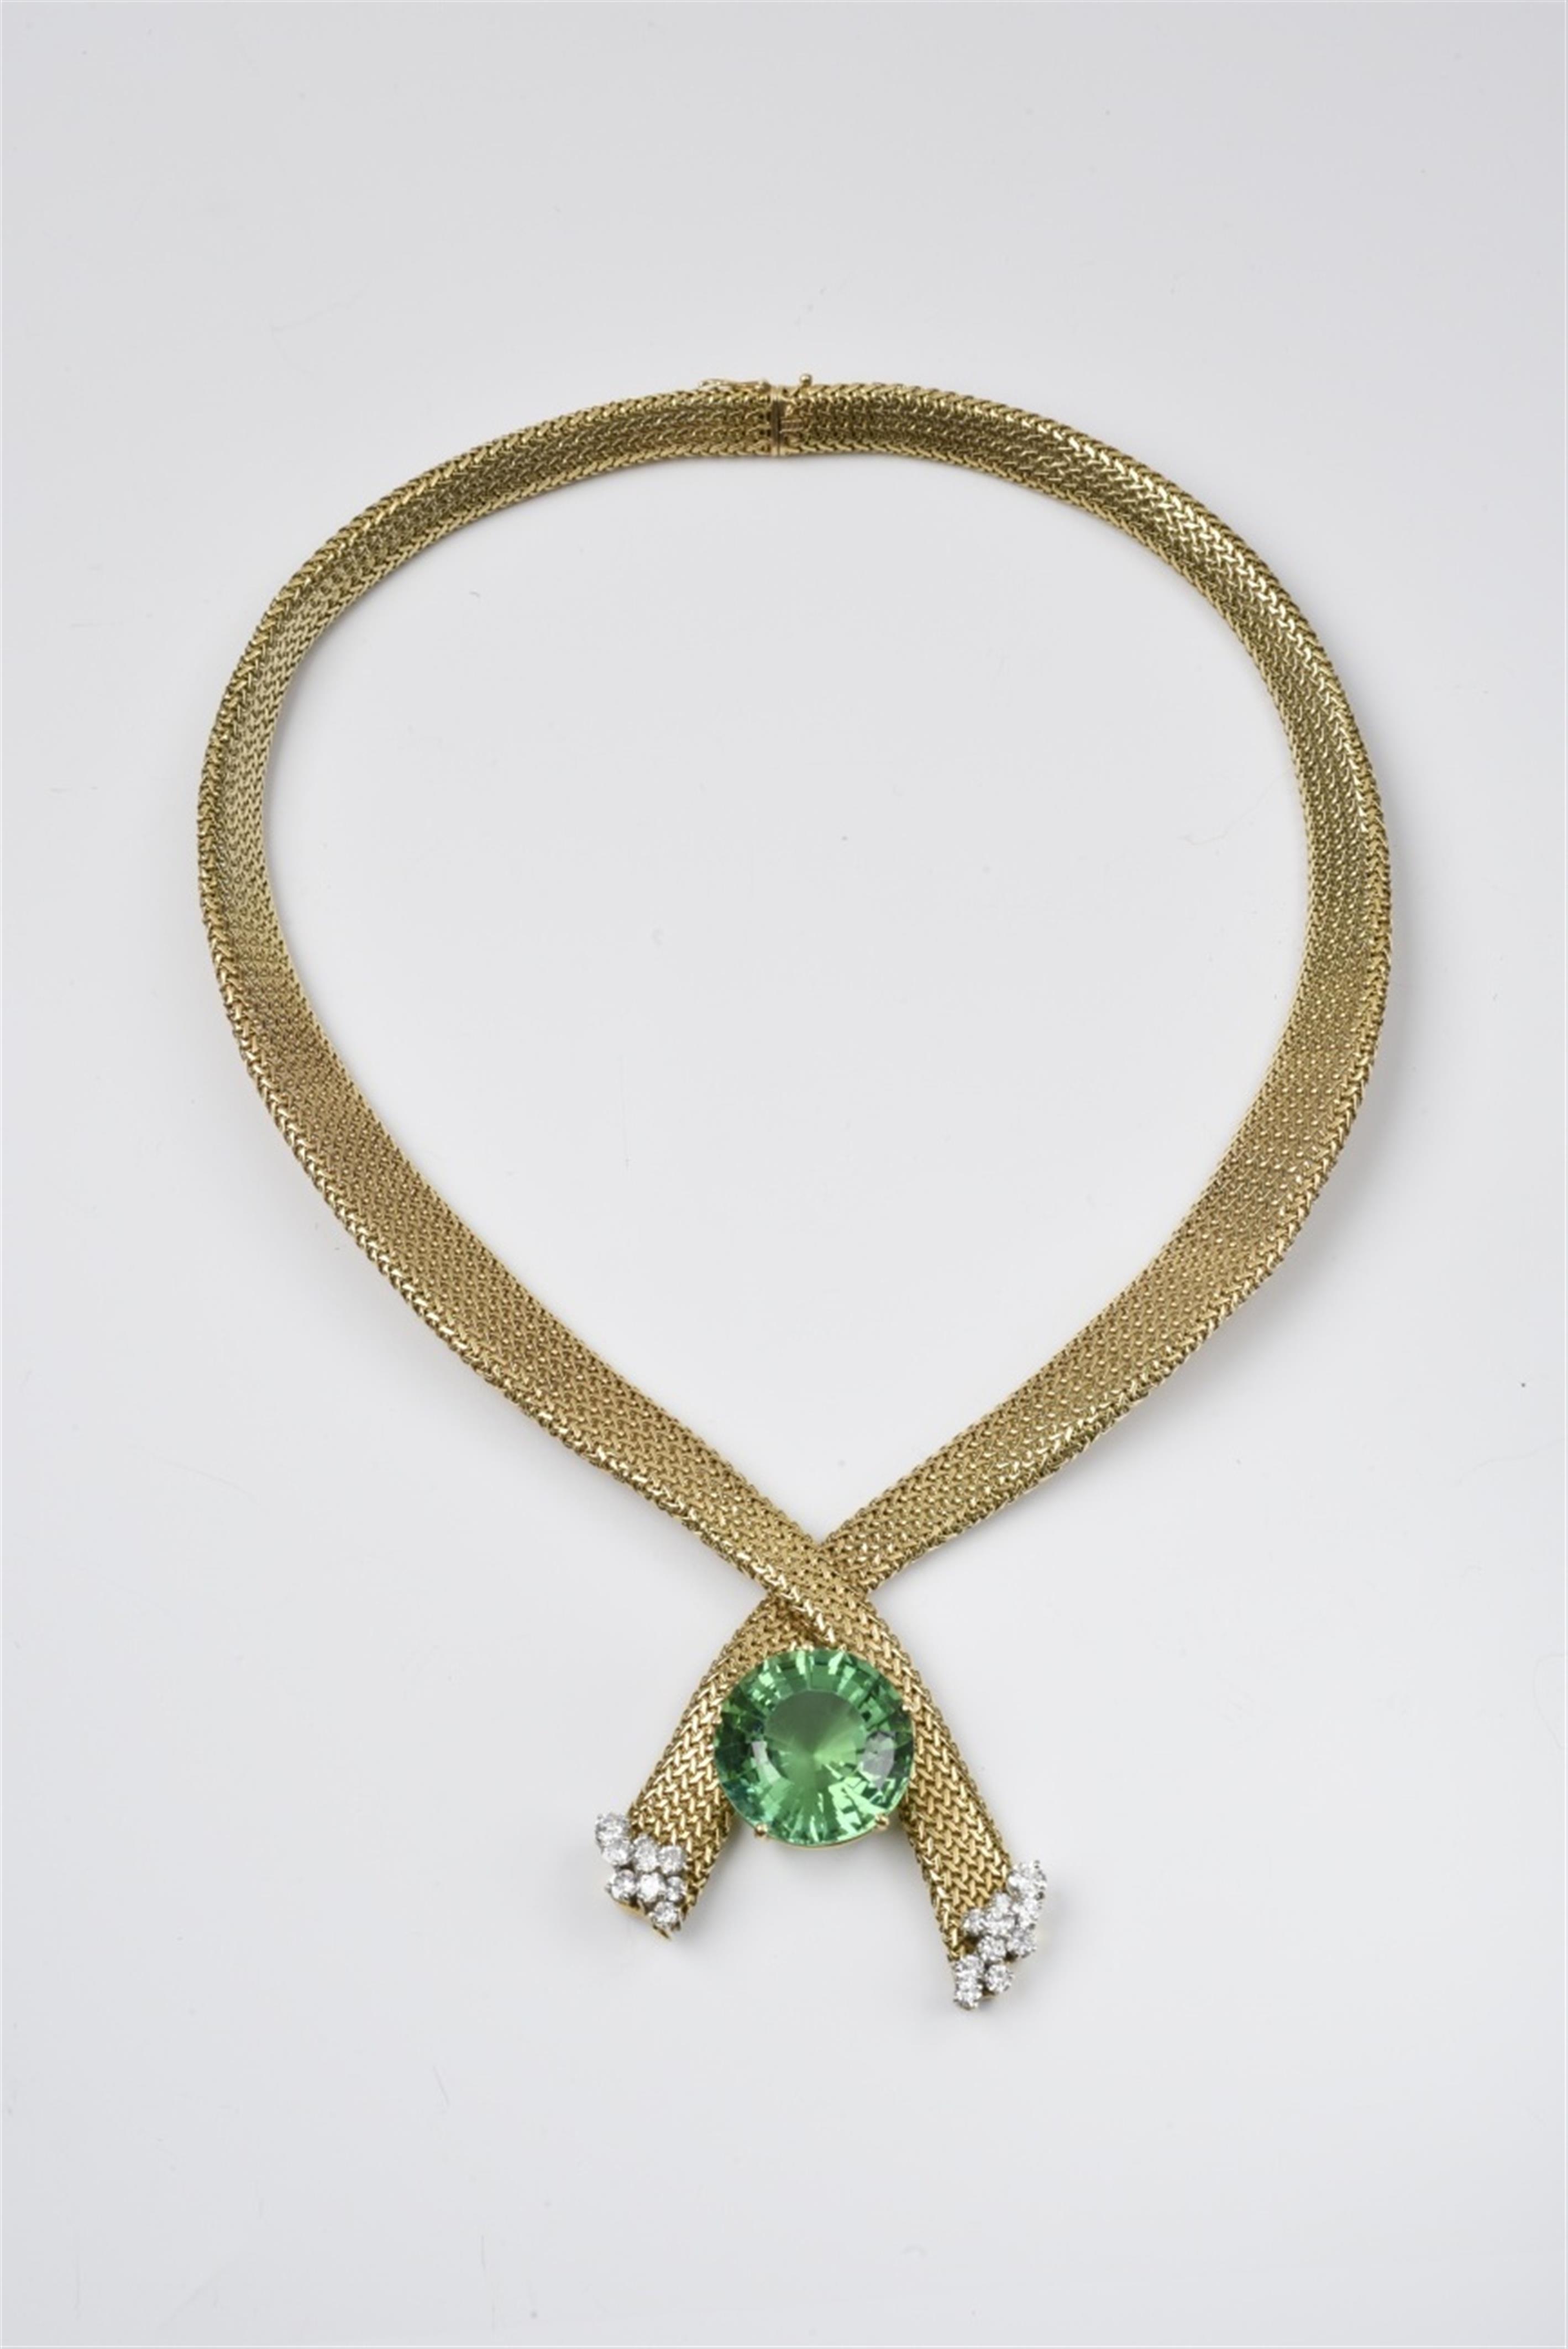 An 18k woven gold, tourmaline, and diamond collier - image-1